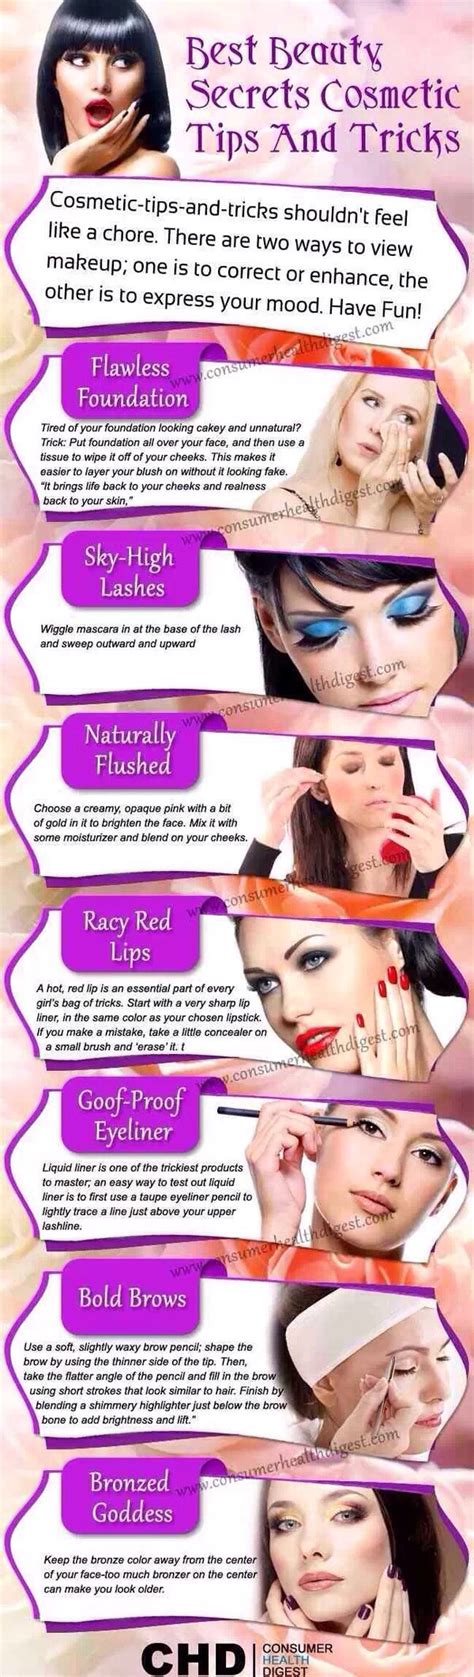 The Best Beauty Tips Tricks And More 💕💕💕👍 Musely